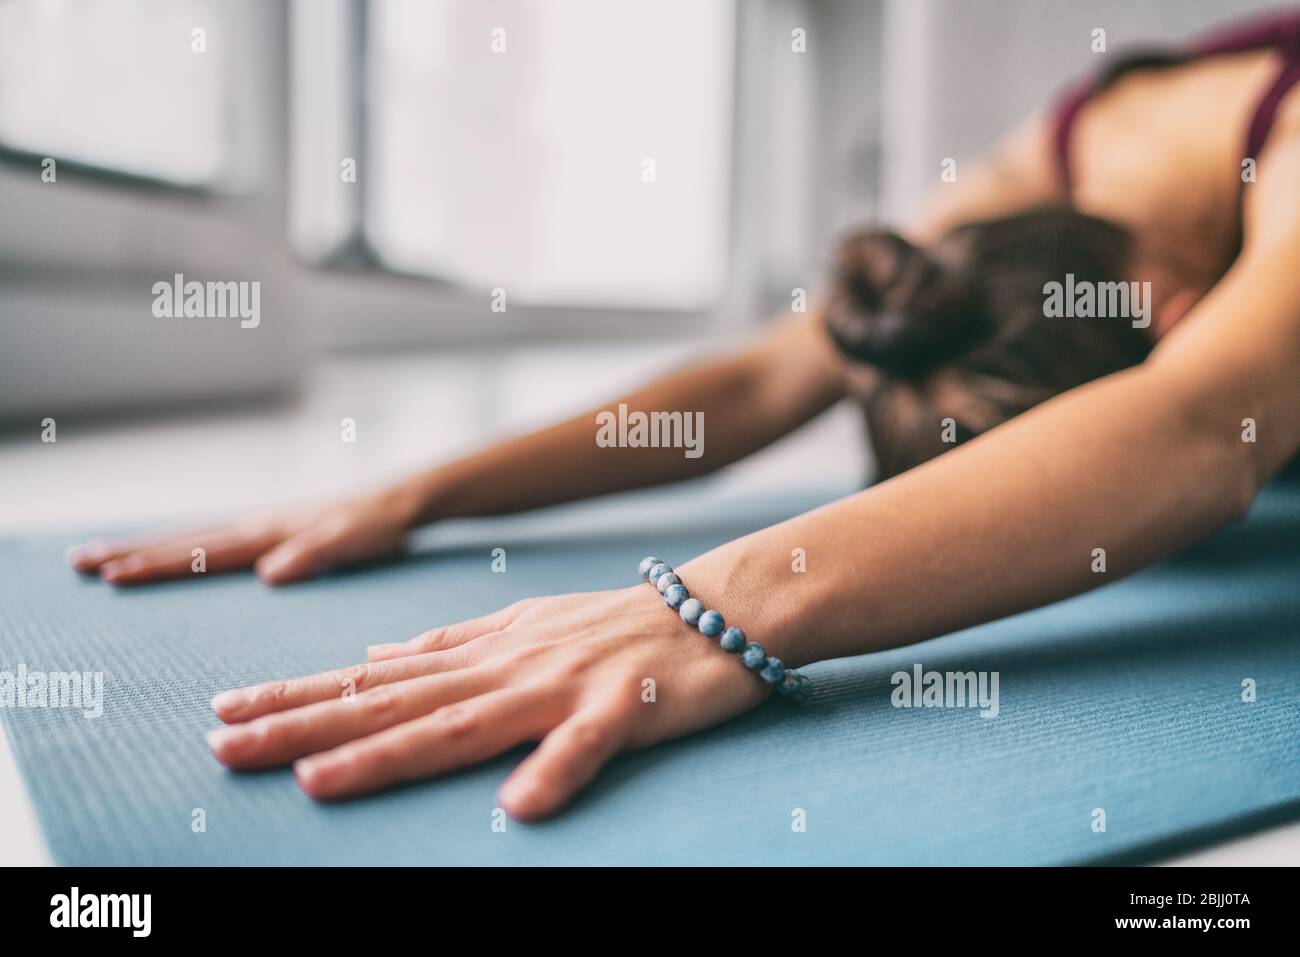 Yoga meditation wellness background - woman doing childs pose stretch on exercise mat - training fitness class at home or gym active living. Stock Photo